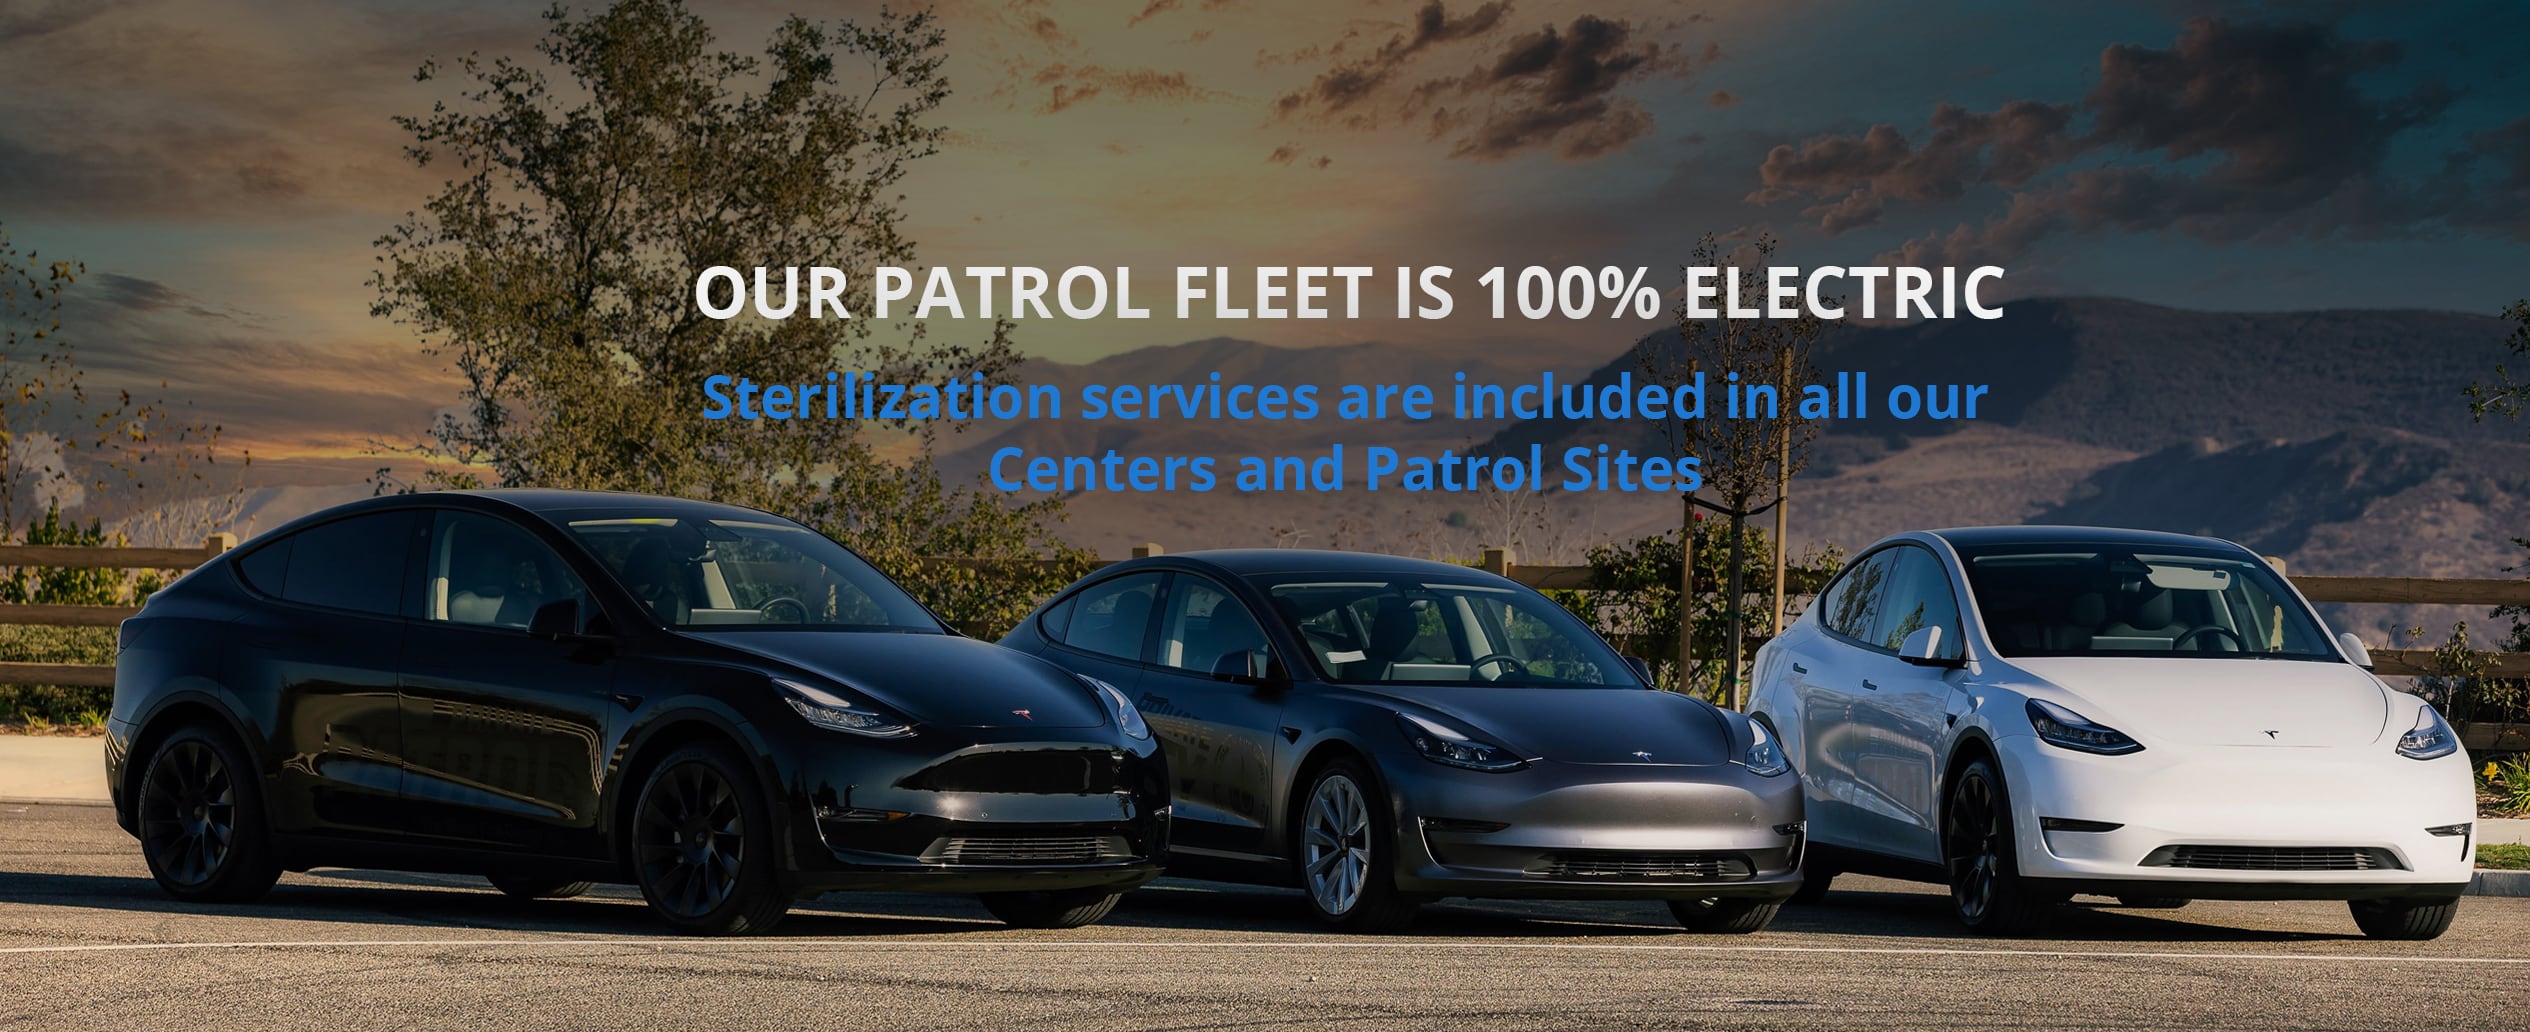 Our patrol fleet is 100 percent electric